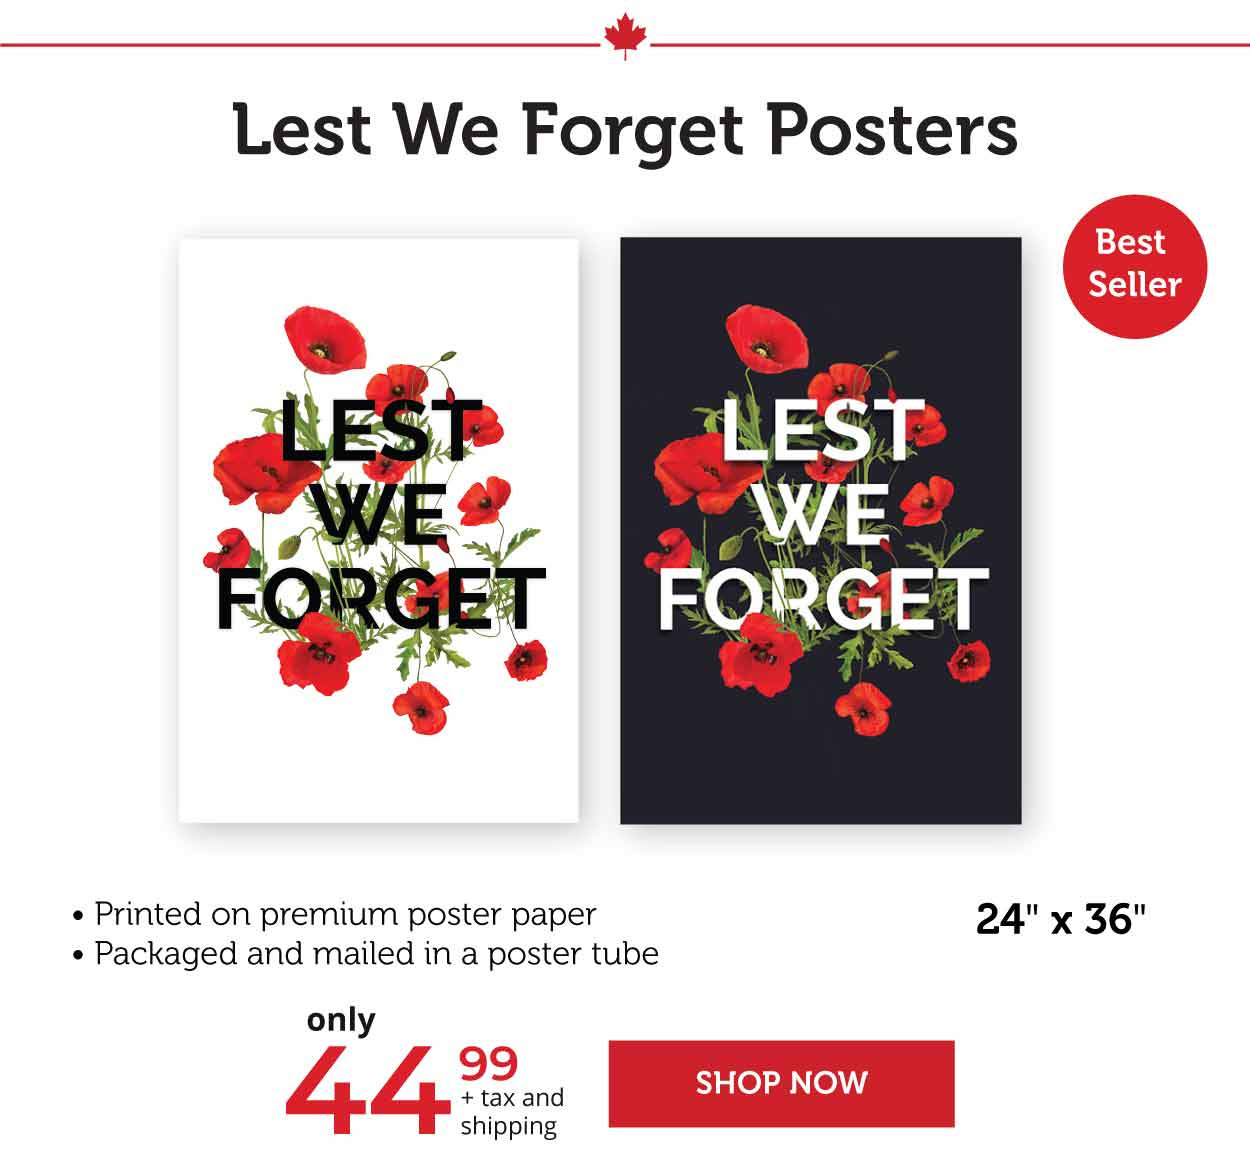 Lest We Forget Posters